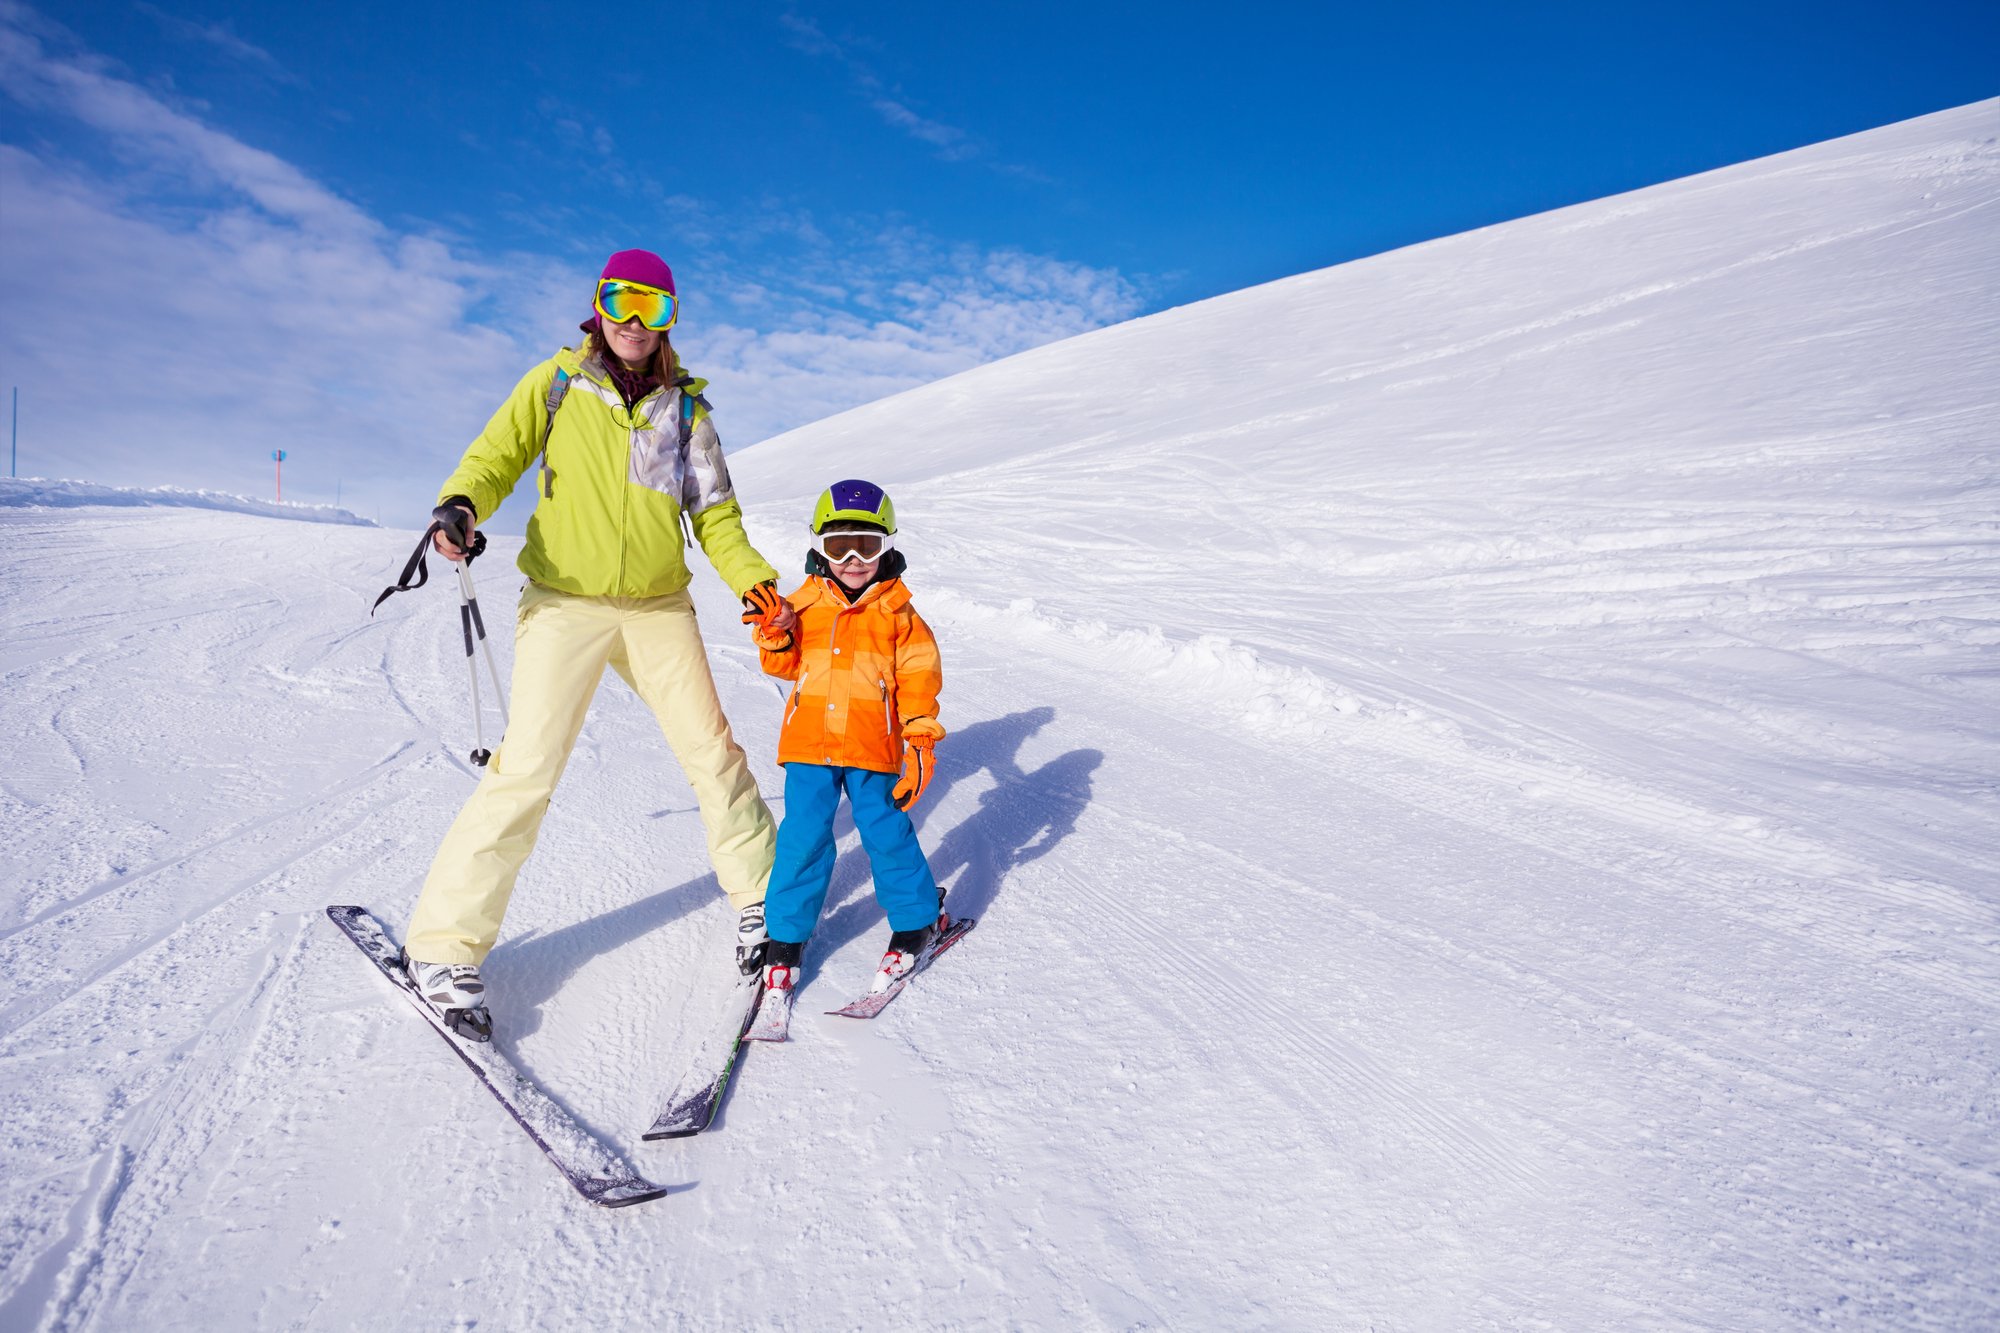 Choose a bluebird day for your first ski experience